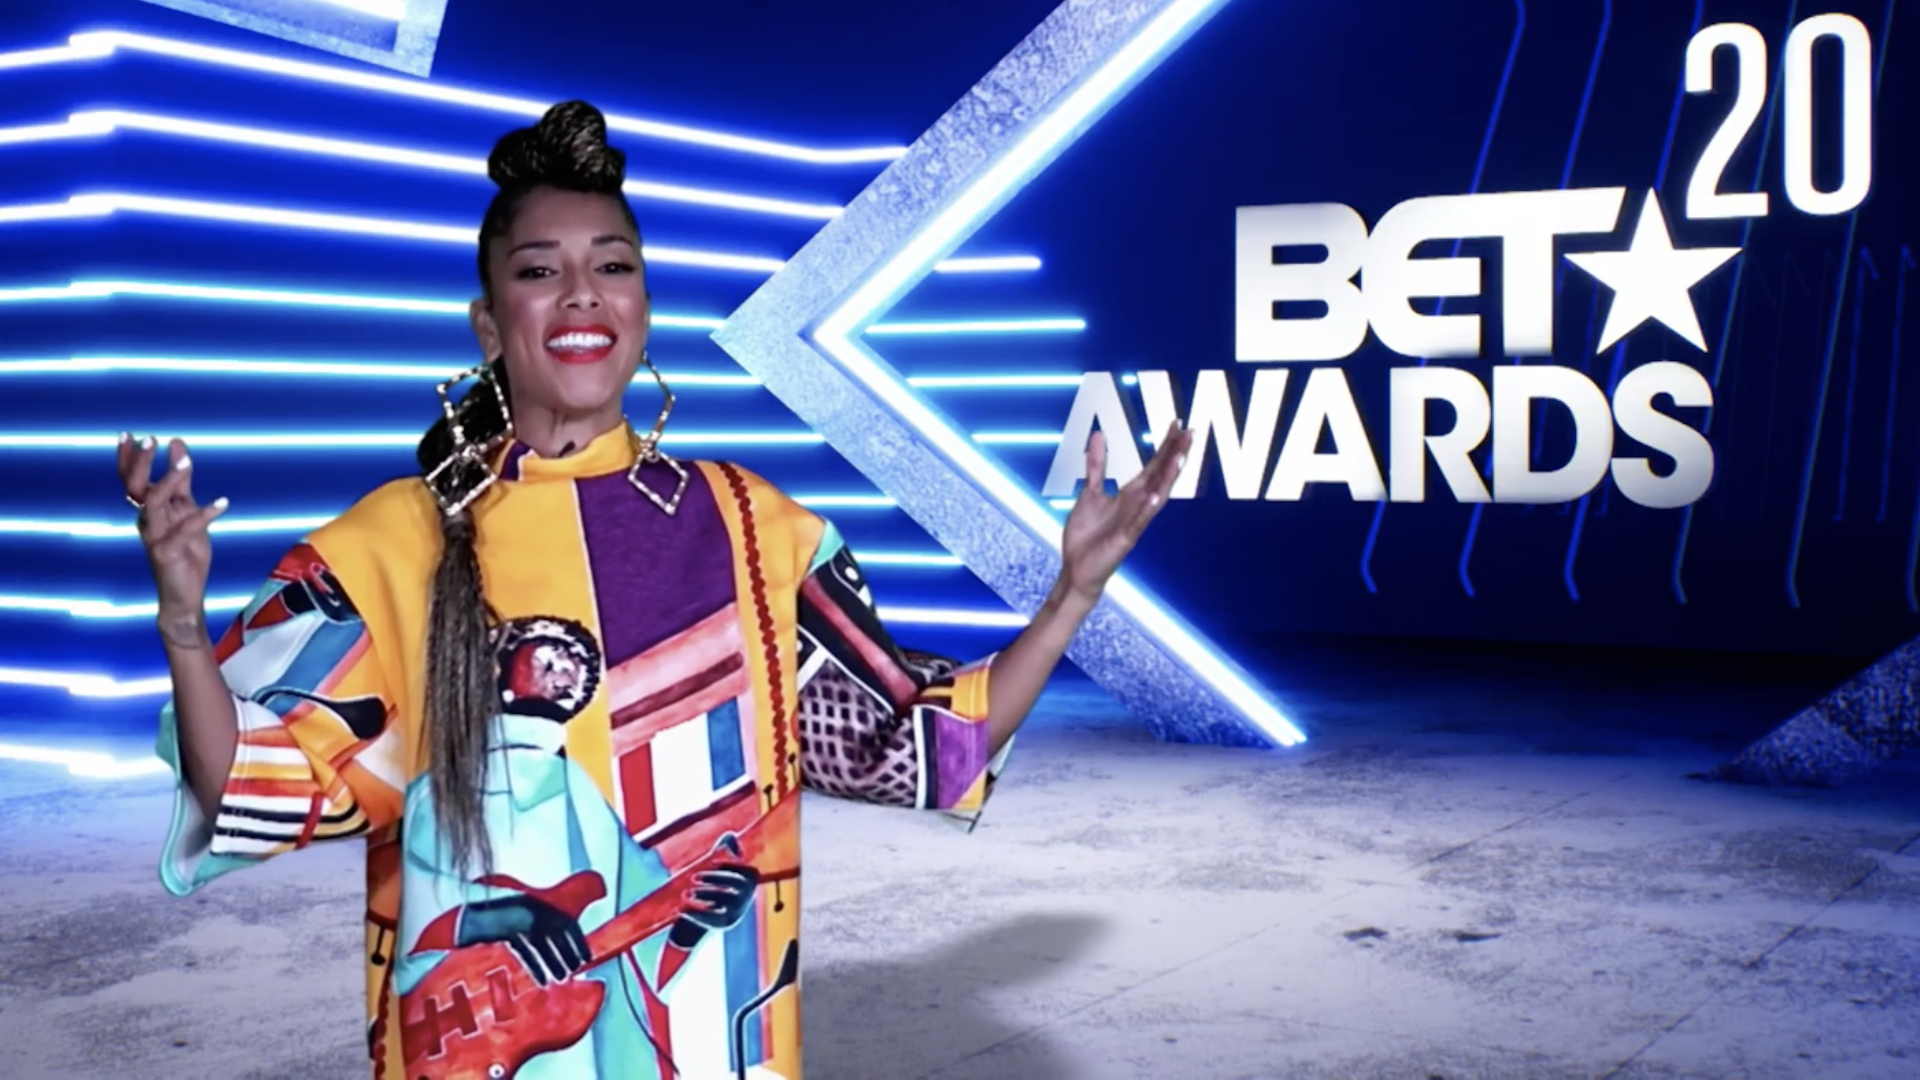 Highlights from the BET Awards 2020 only on BET.